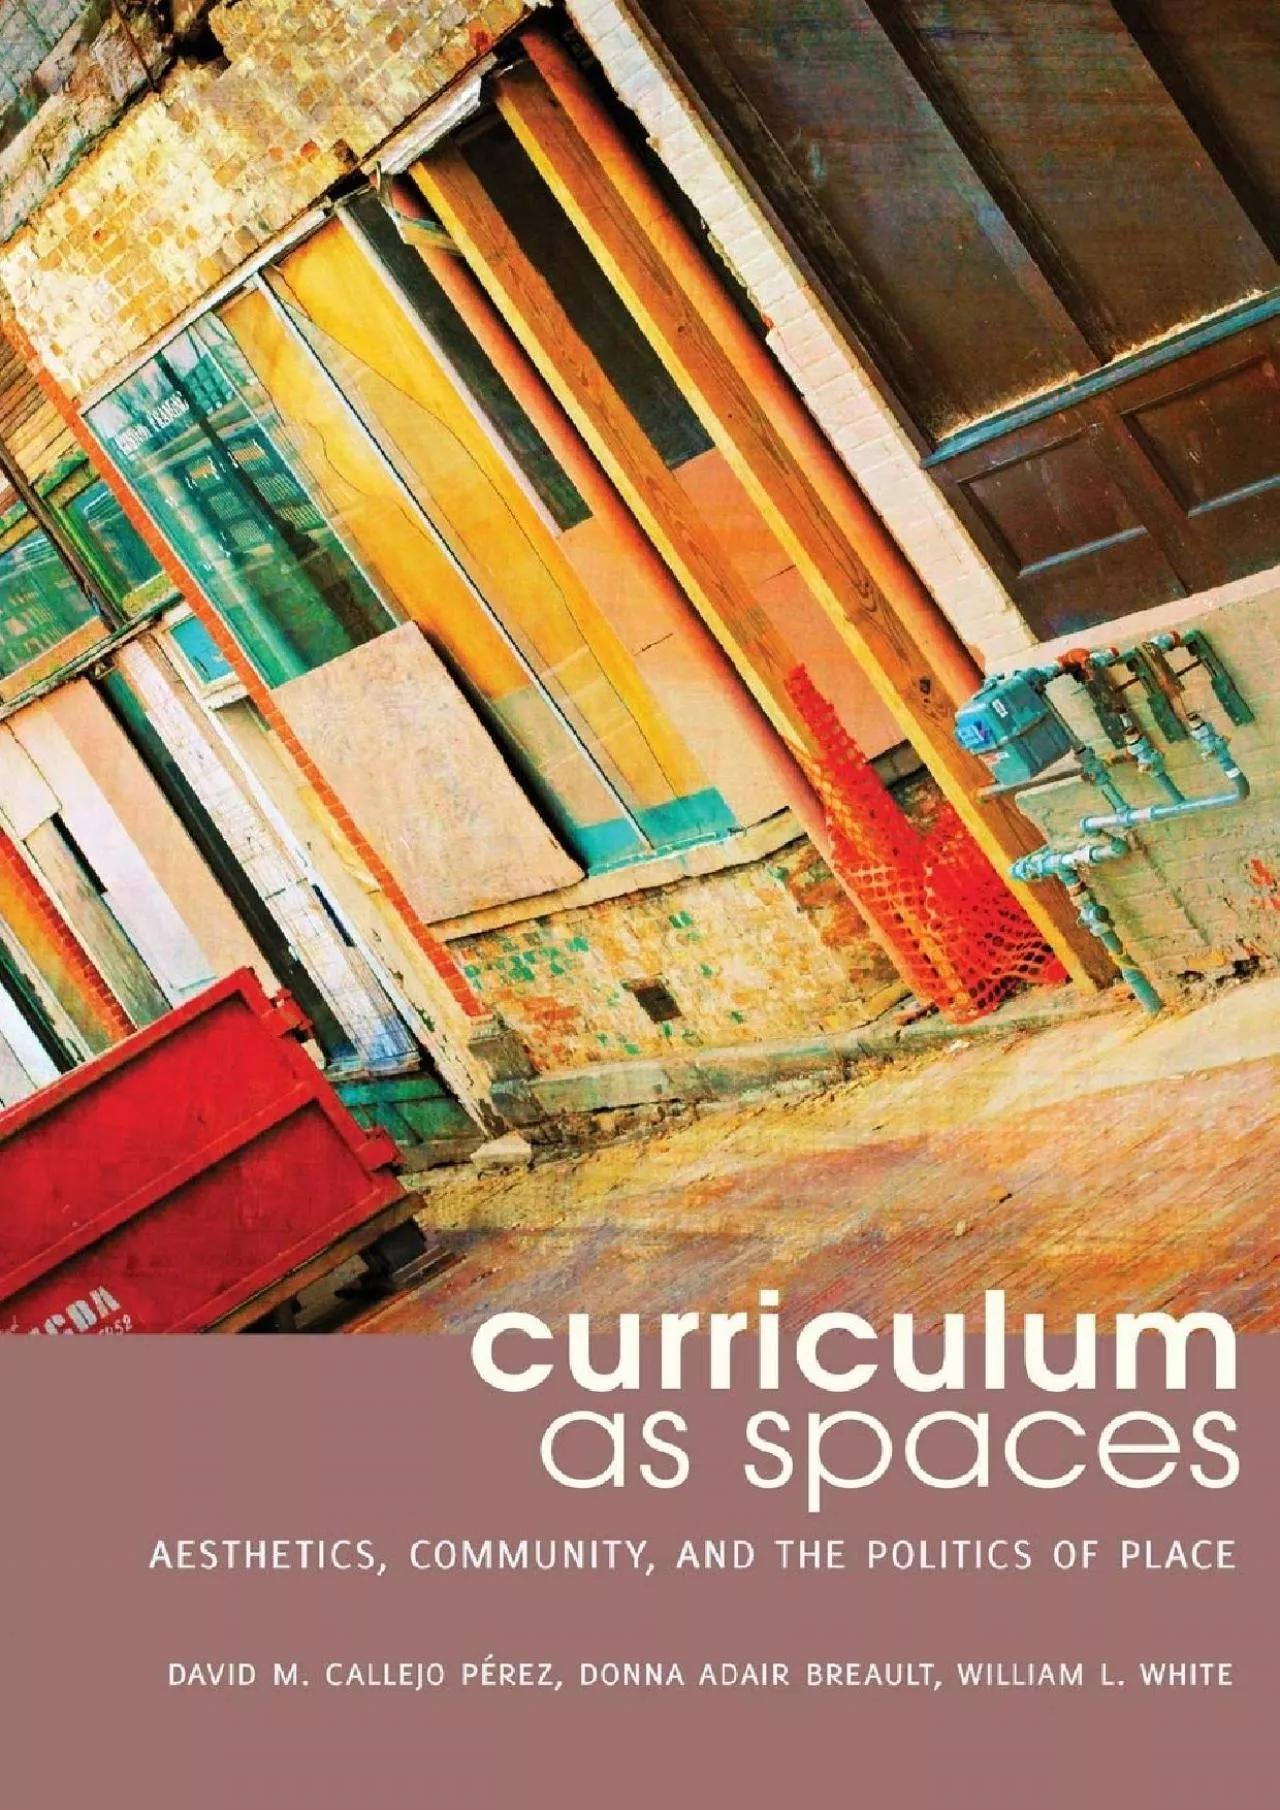 (EBOOK)-Curriculum as Spaces: Aesthetics, Community, and the Politics of Place (Complicated